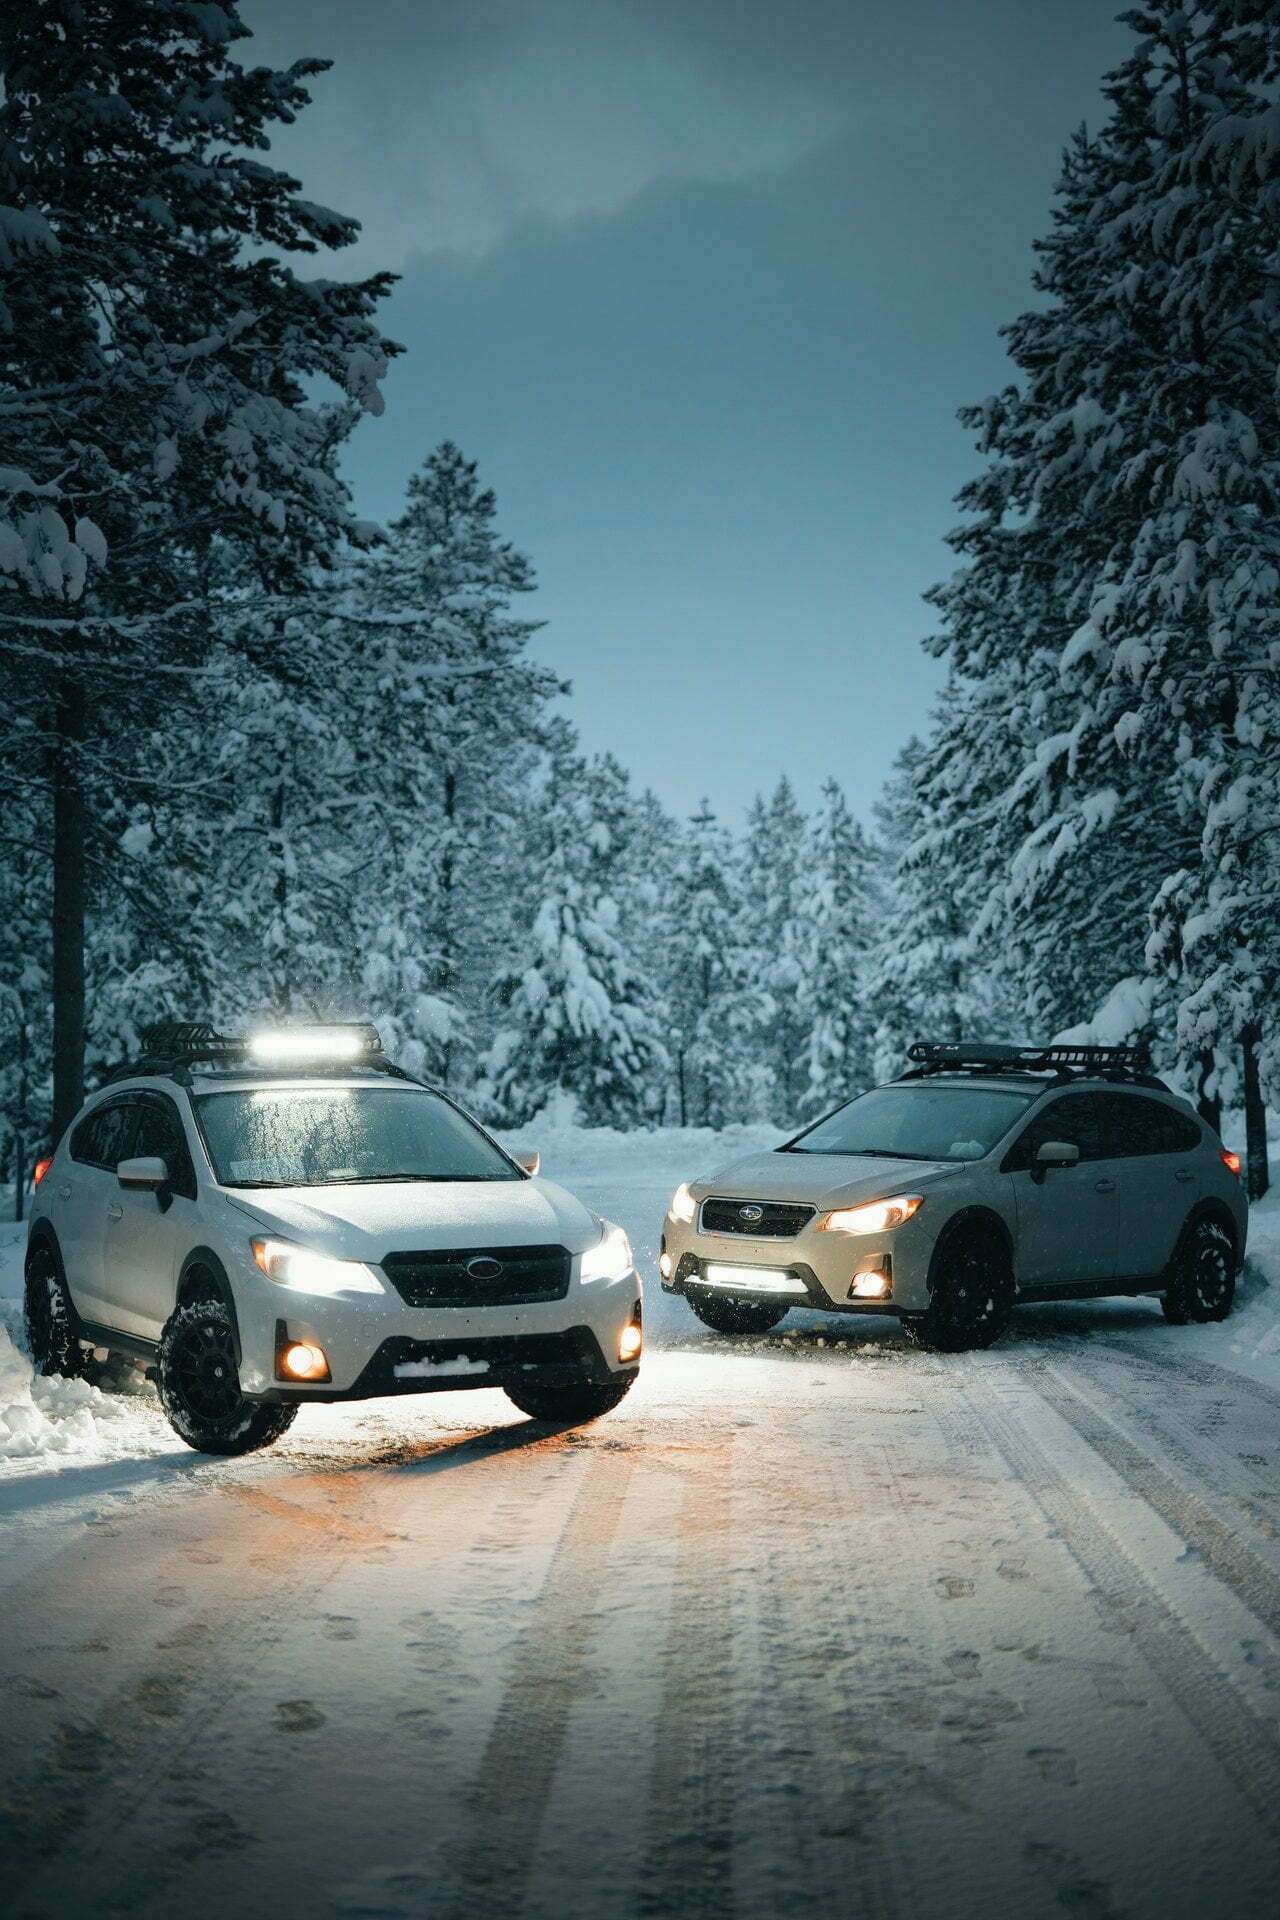 Two White Suvs on Snow covered Road